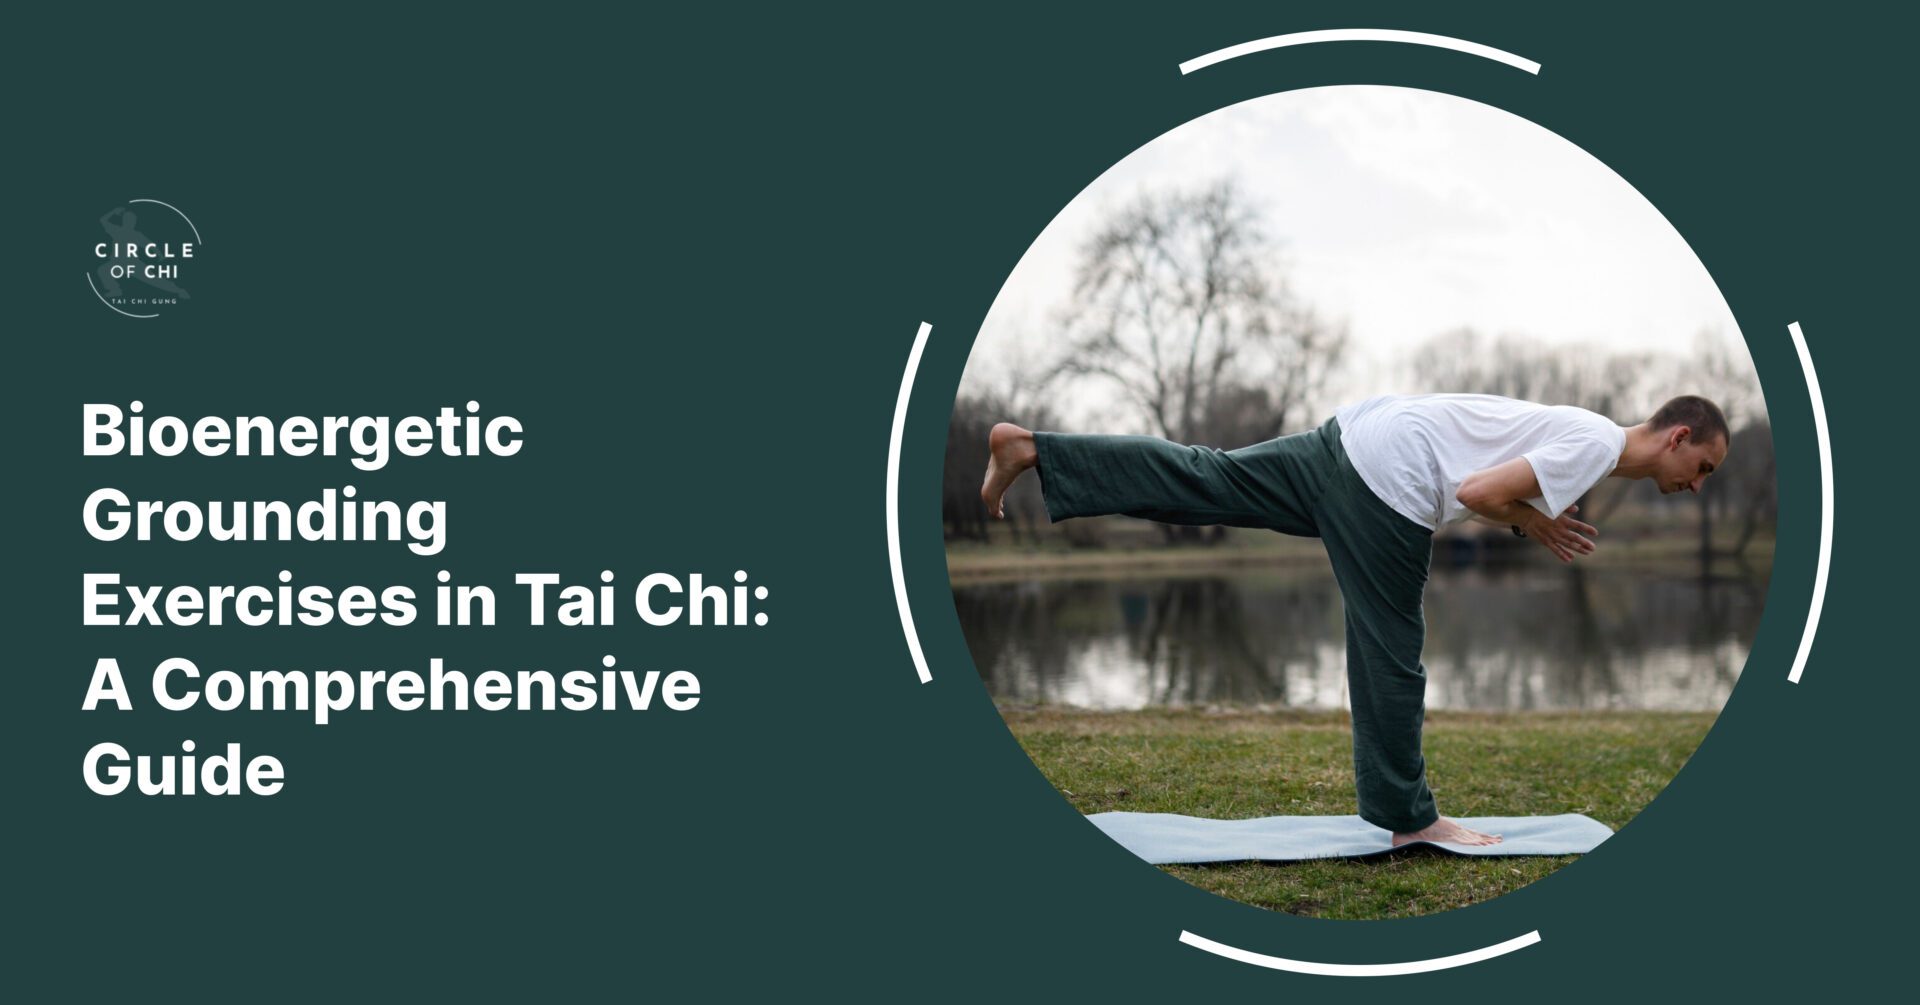 Bioenergetic Grounding Exercises in Tai Chi: A Comprehensive Guide